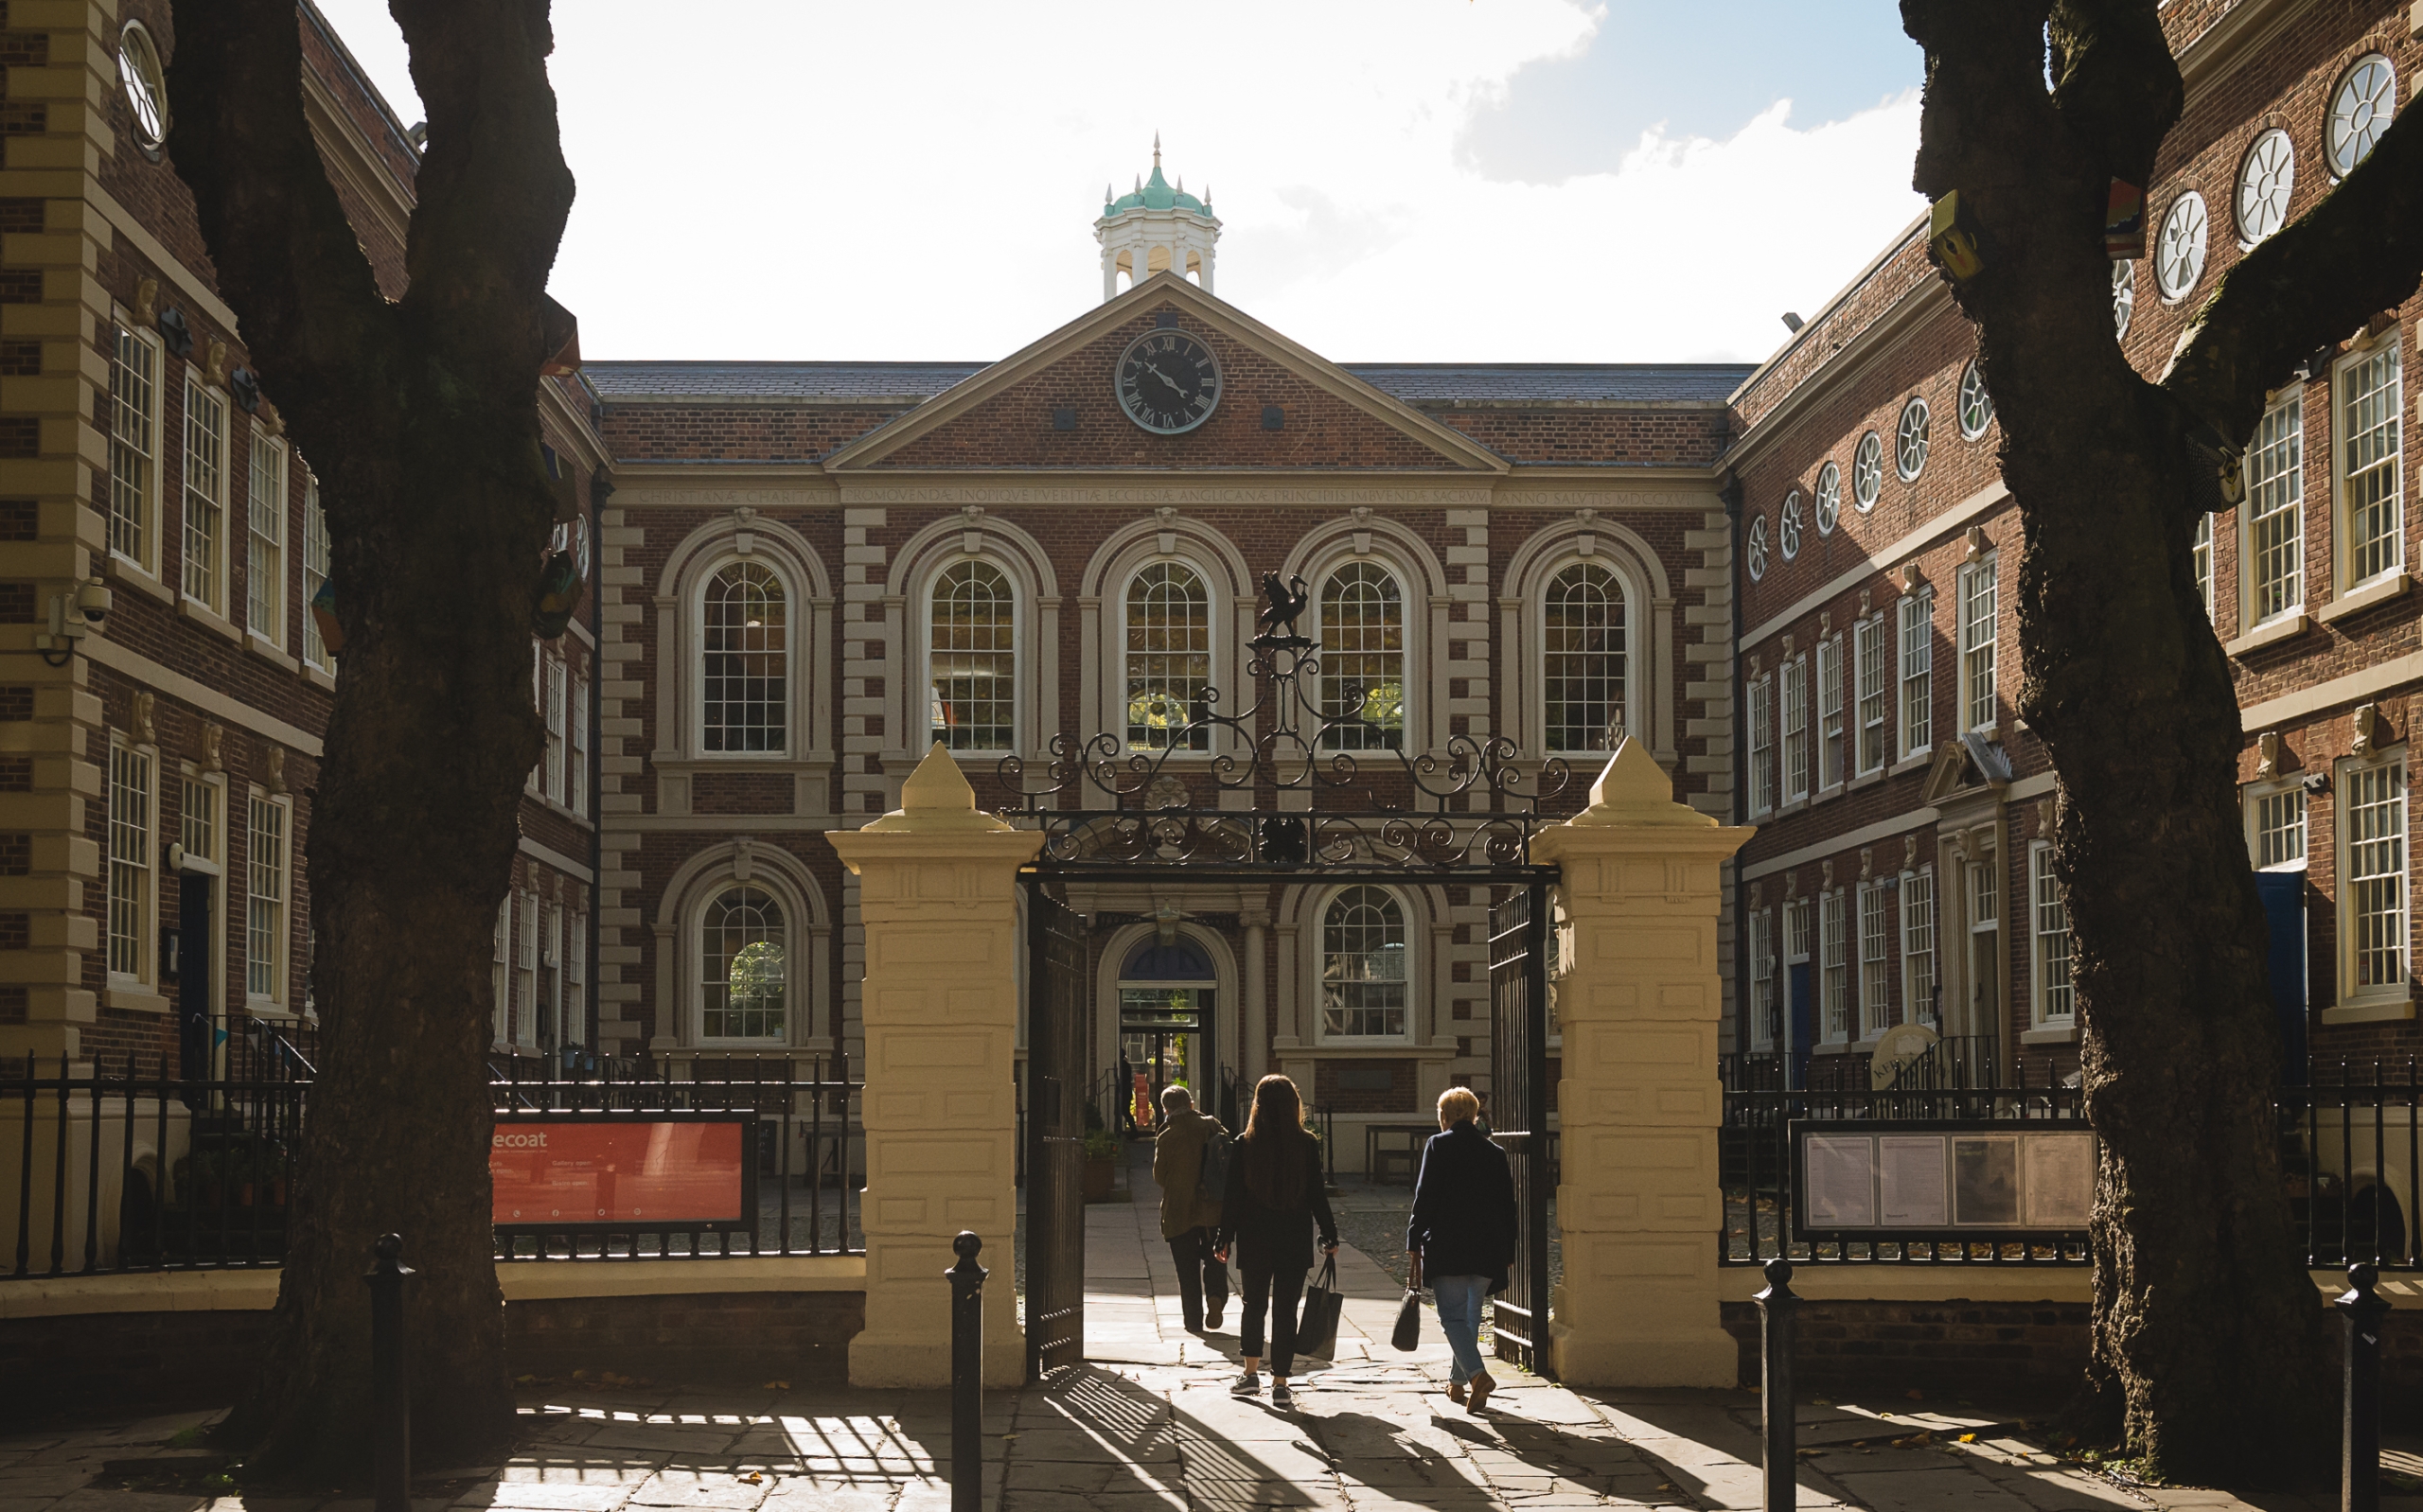 bluecoat from the front through the front gates at daytime